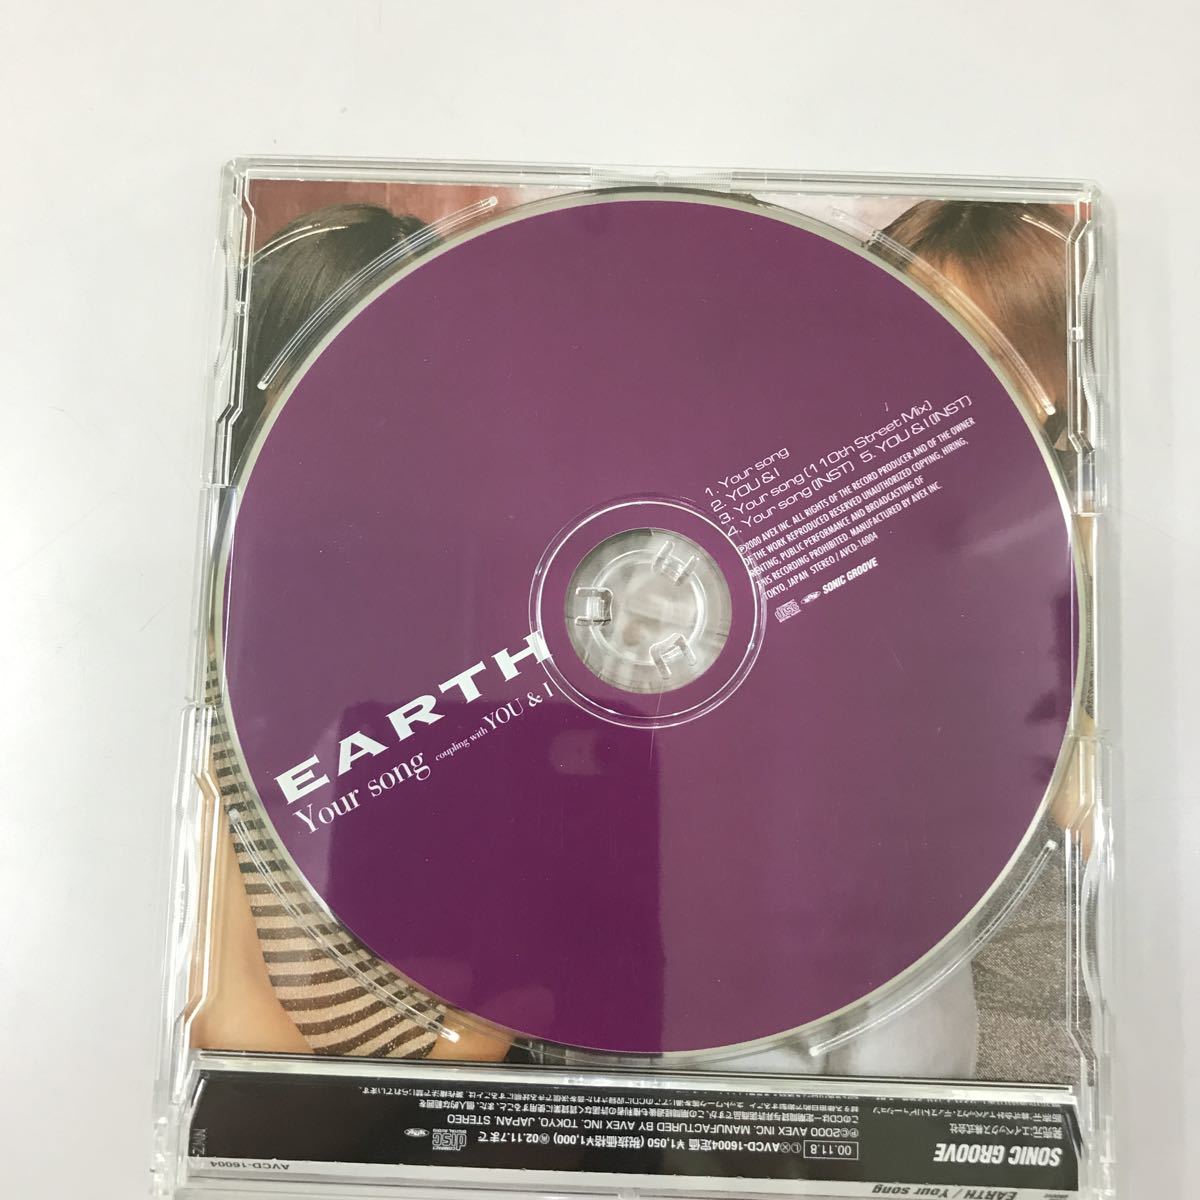 CD 中古☆【邦楽】EARTH your song